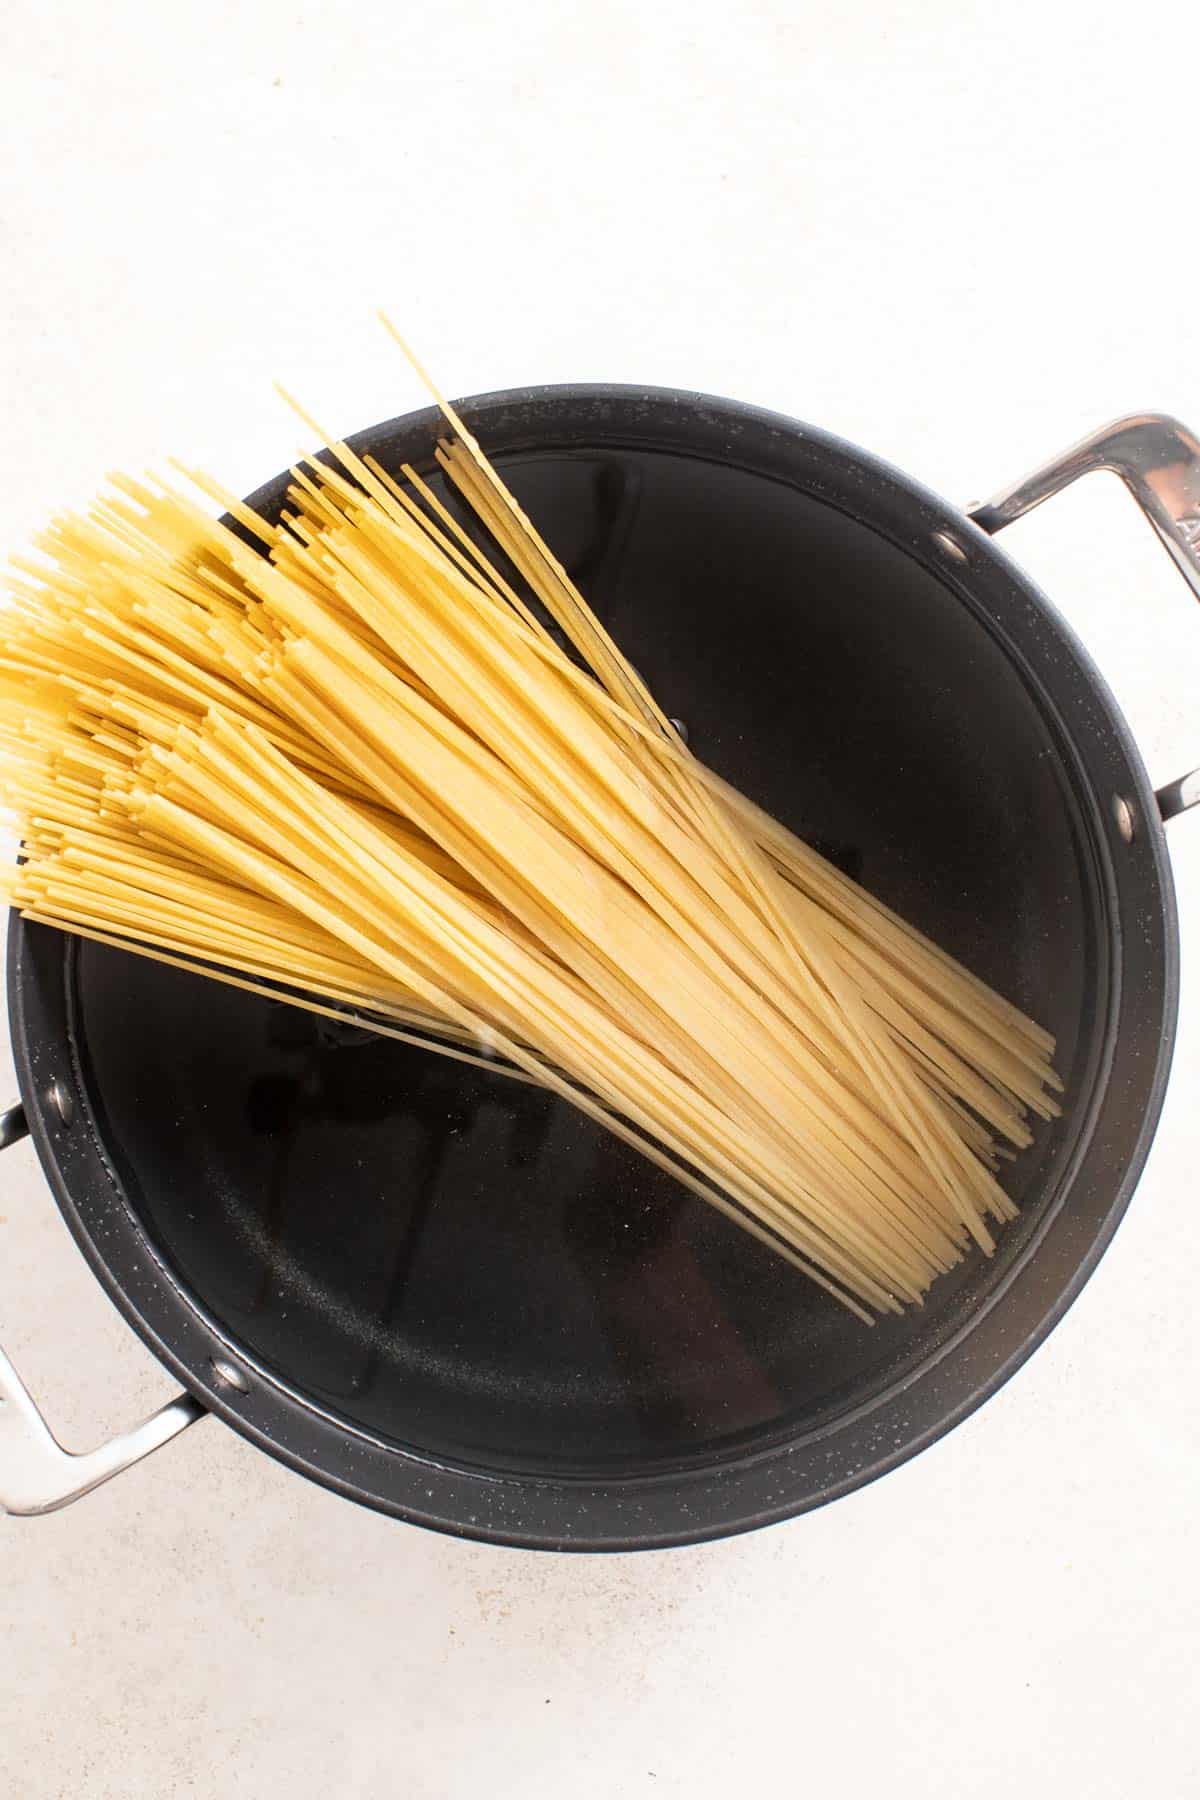 Linguine in a black pot of water.